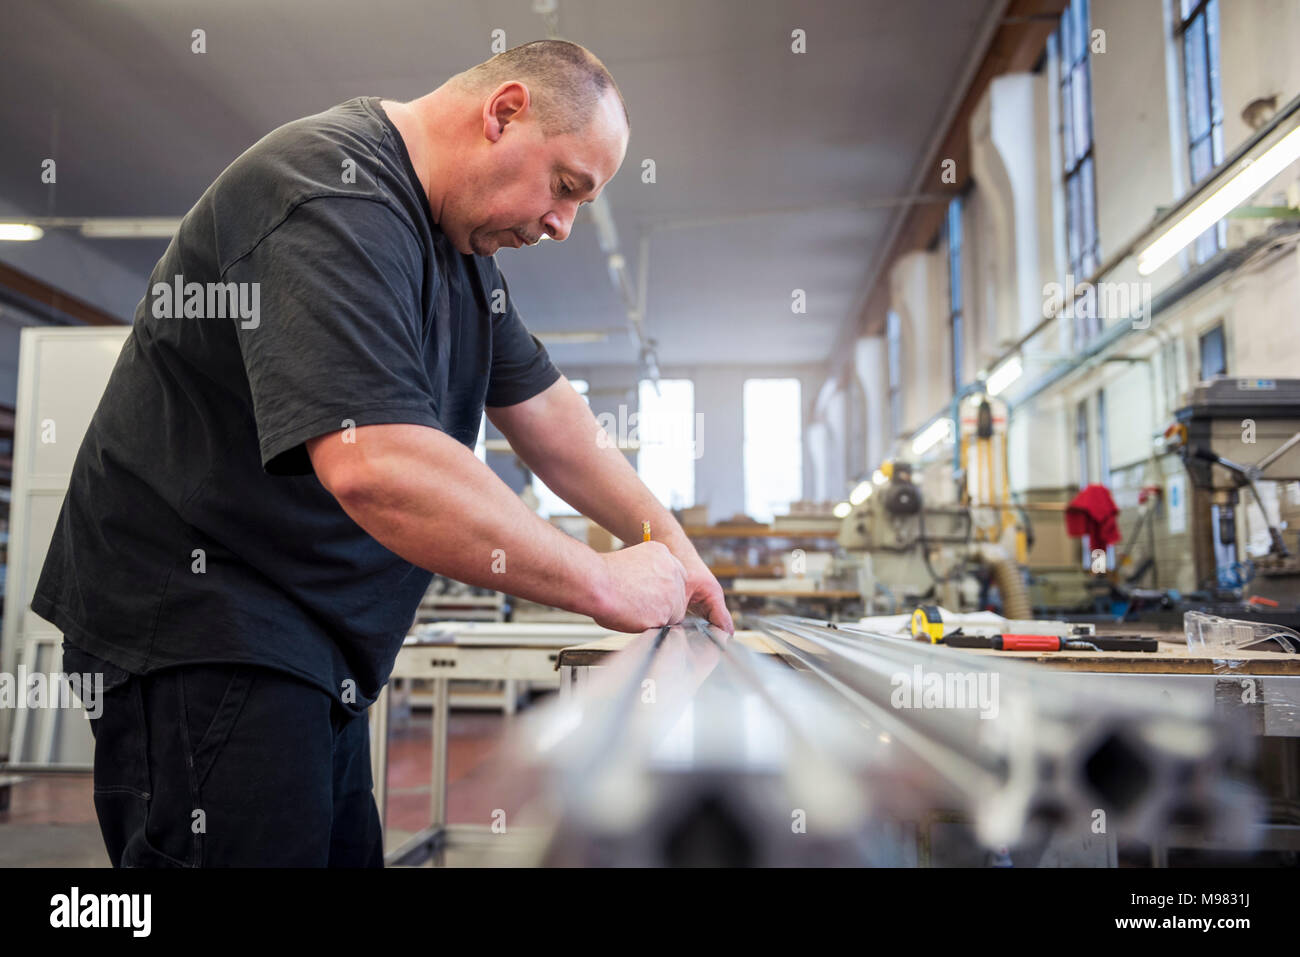 Man in factory working on metal component Stock Photo